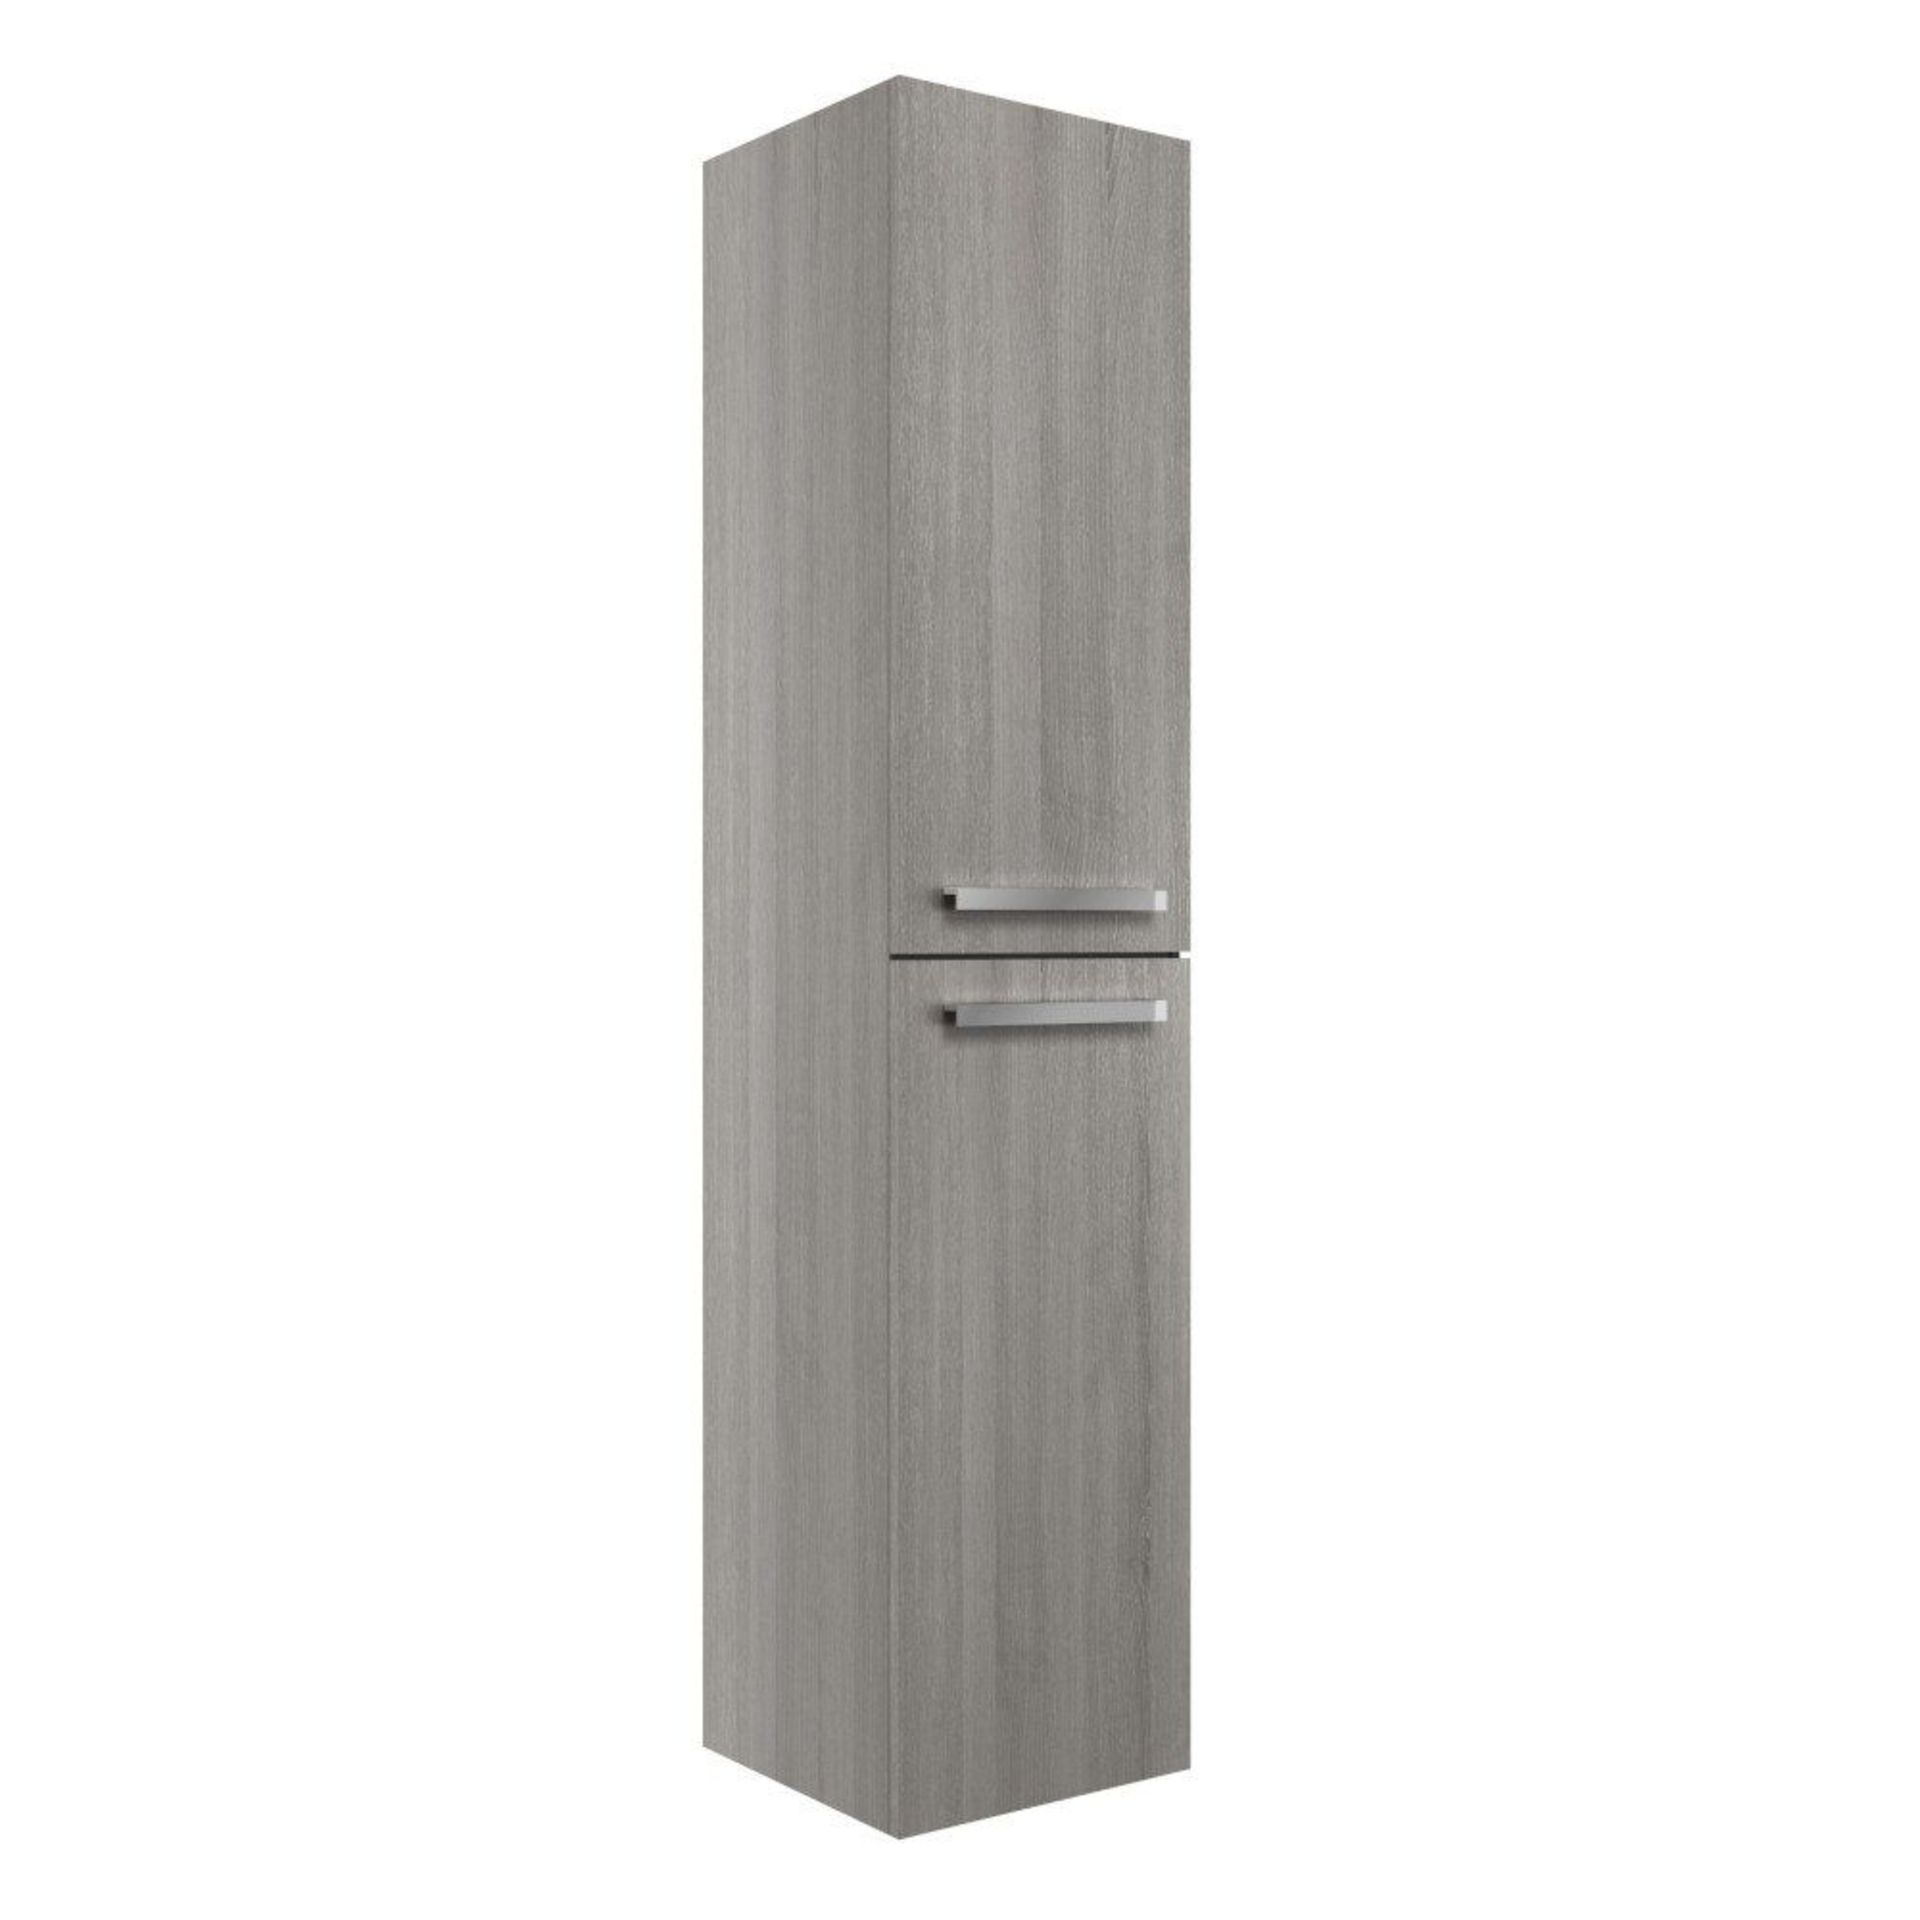 (DT78) NEW & BOXED Morina 350mm Wall Hung Tall Unit - Elm Grey. Soft close hinged doors ? Left or